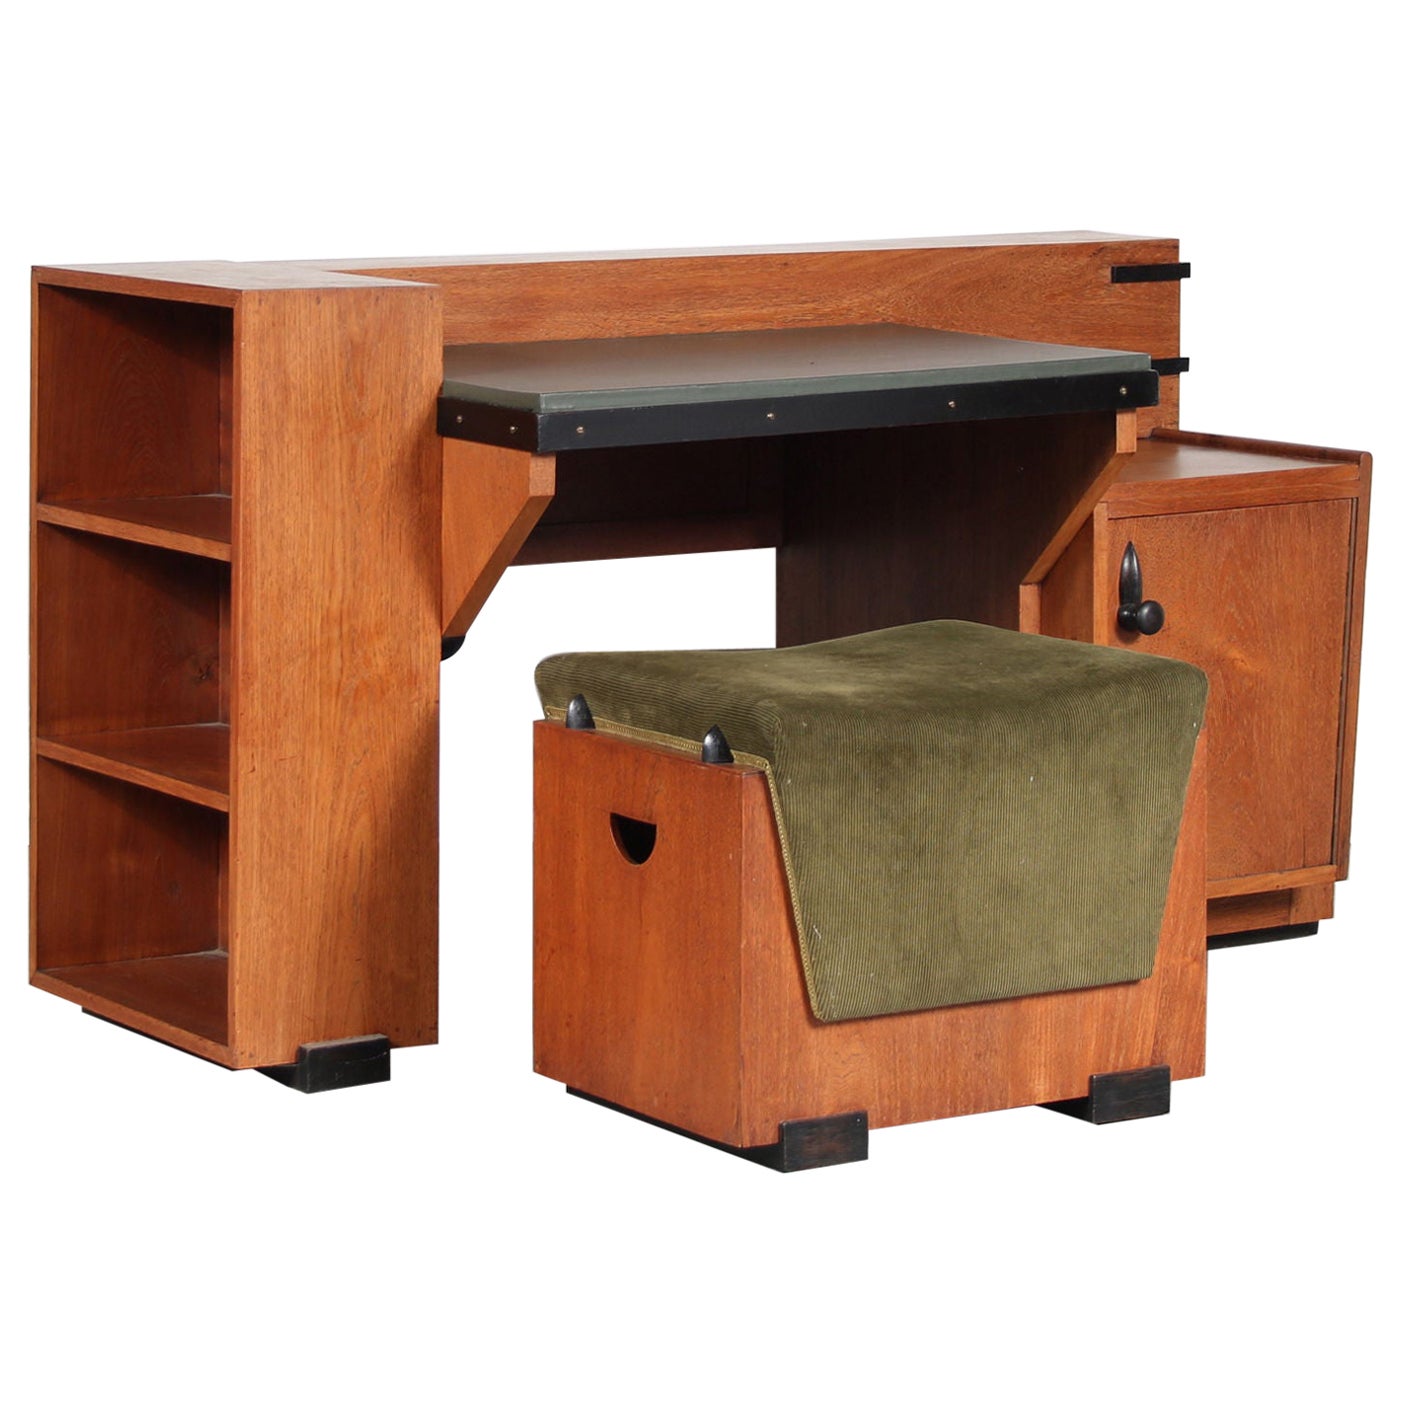 Indonesian Desks and Writing Tables - 6 For Sale at 1stDibs | desk indonesia,  indonesia table, indonesian writing